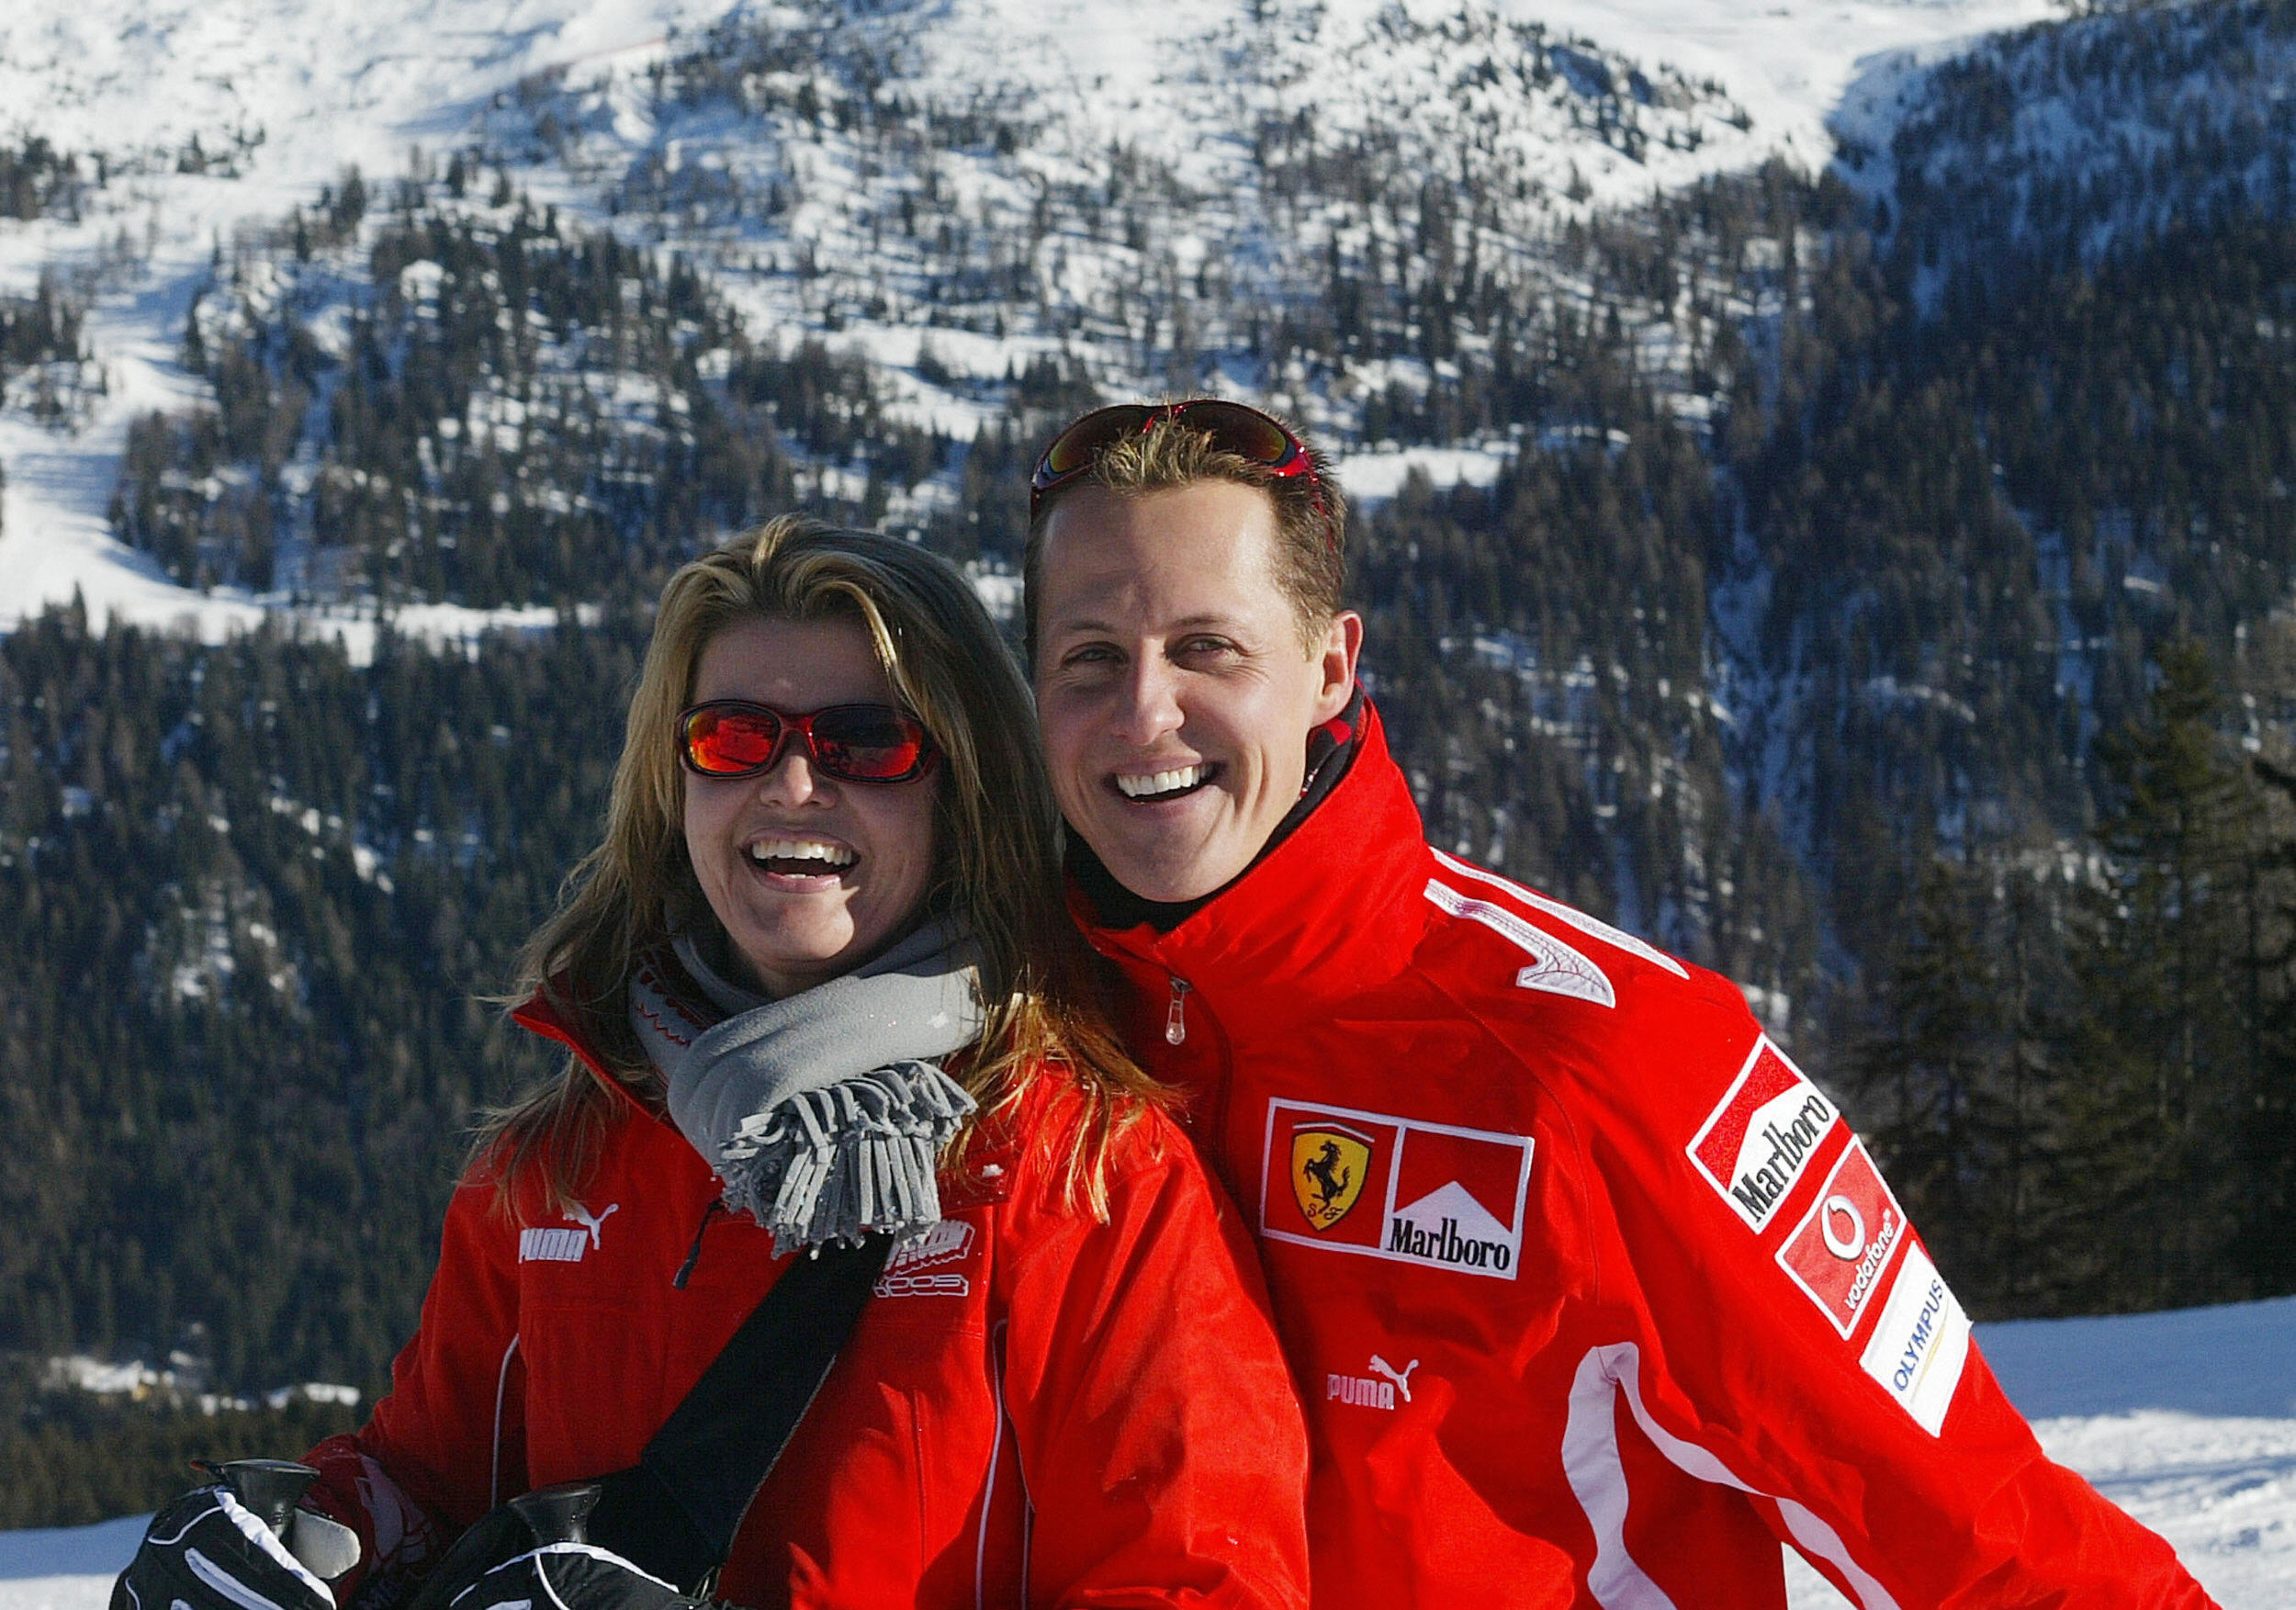 Michael Schumacher’s Wife Has Been ‘Like a Prisoner’ for 10 Years as ...